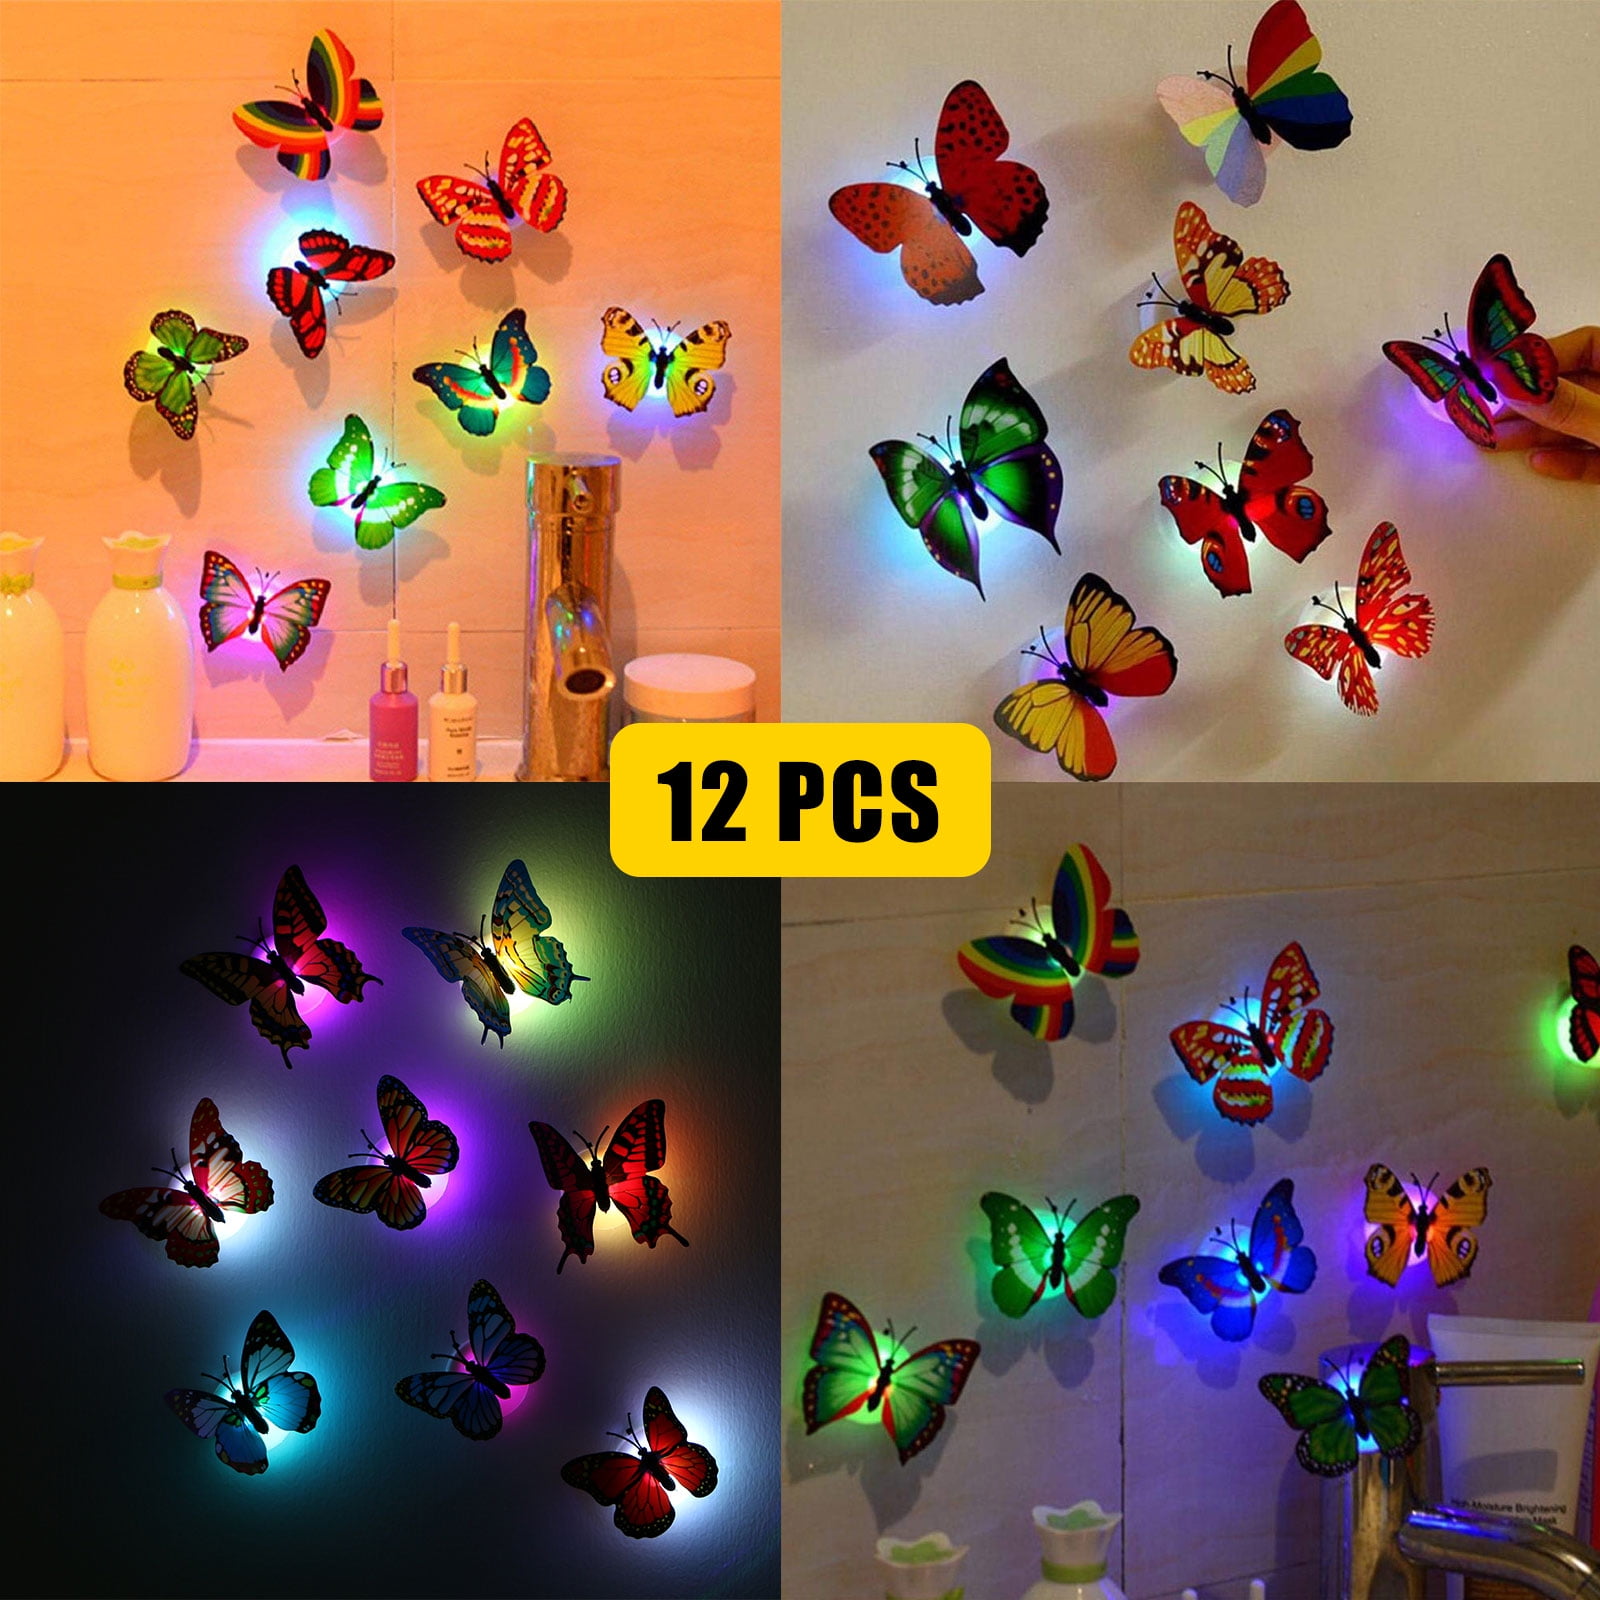 12 X 3D Butterfly Wall Stickers Home Decor Room Decoration Sticker Bedroom Girls